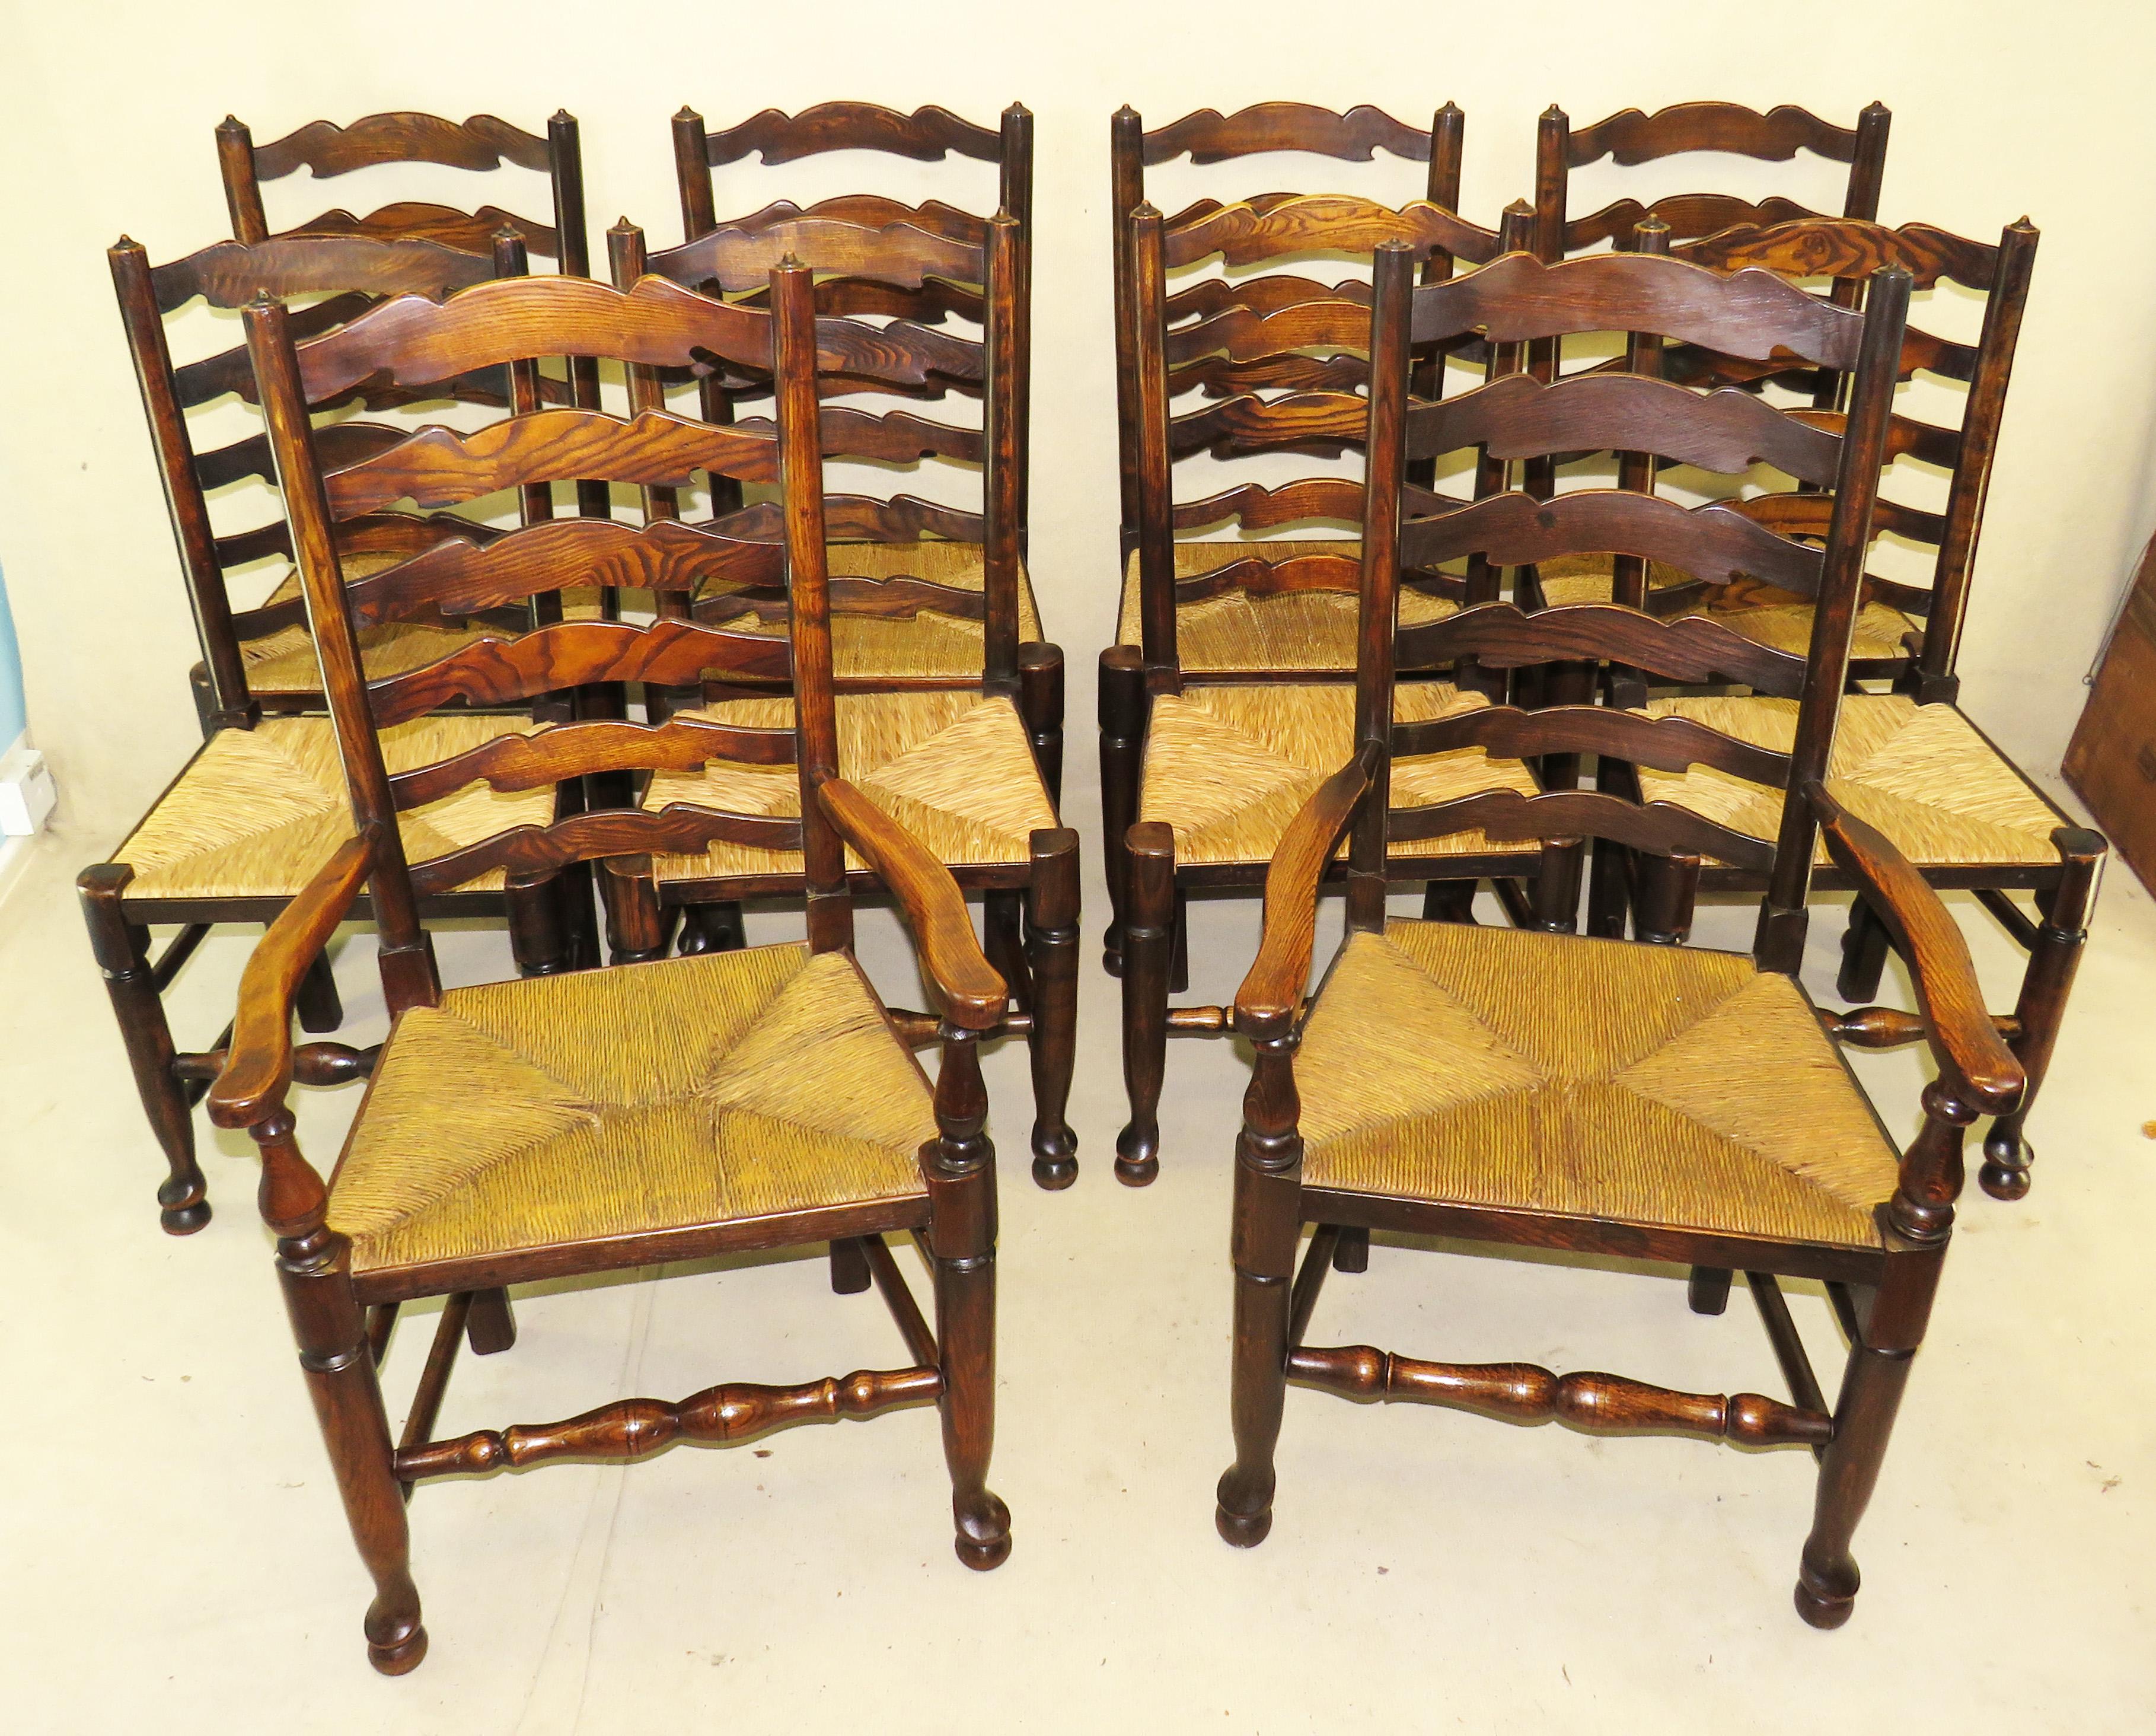 A delightful set of 10 matched late 19th century
English ash and elm ladder back country design
farmhouse dining chairs consisting of 8 single chairs
and 2 armchairs having elegant wavy ladderbacks
over rushed seats raised on turned legs
and